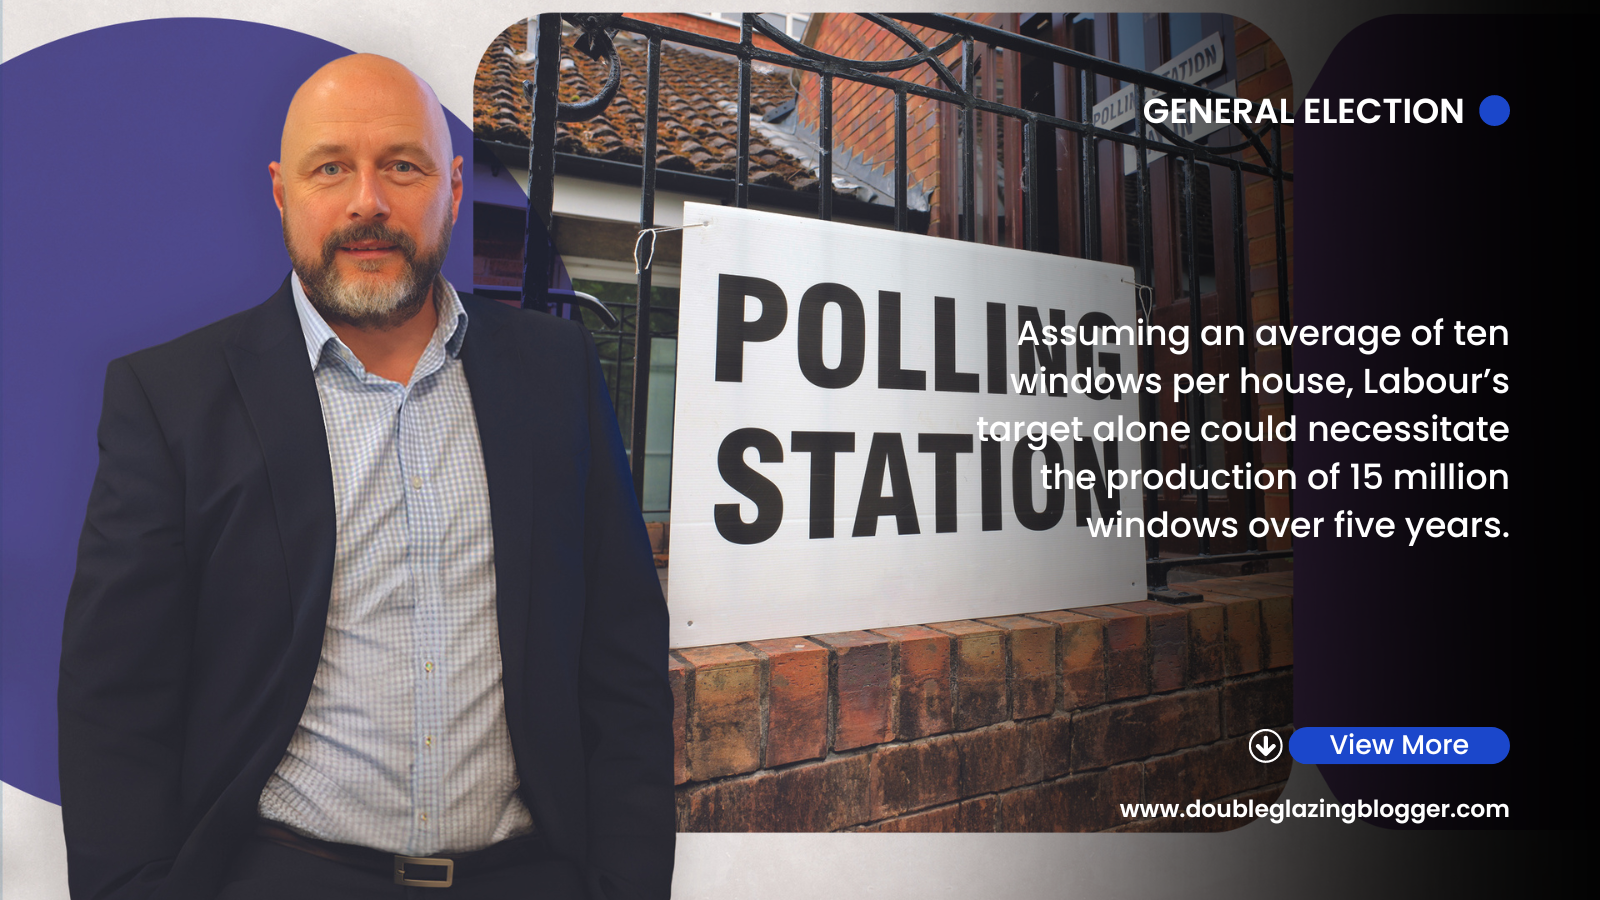 Could The General Election Present A Window Of Opportunity? - Double ...